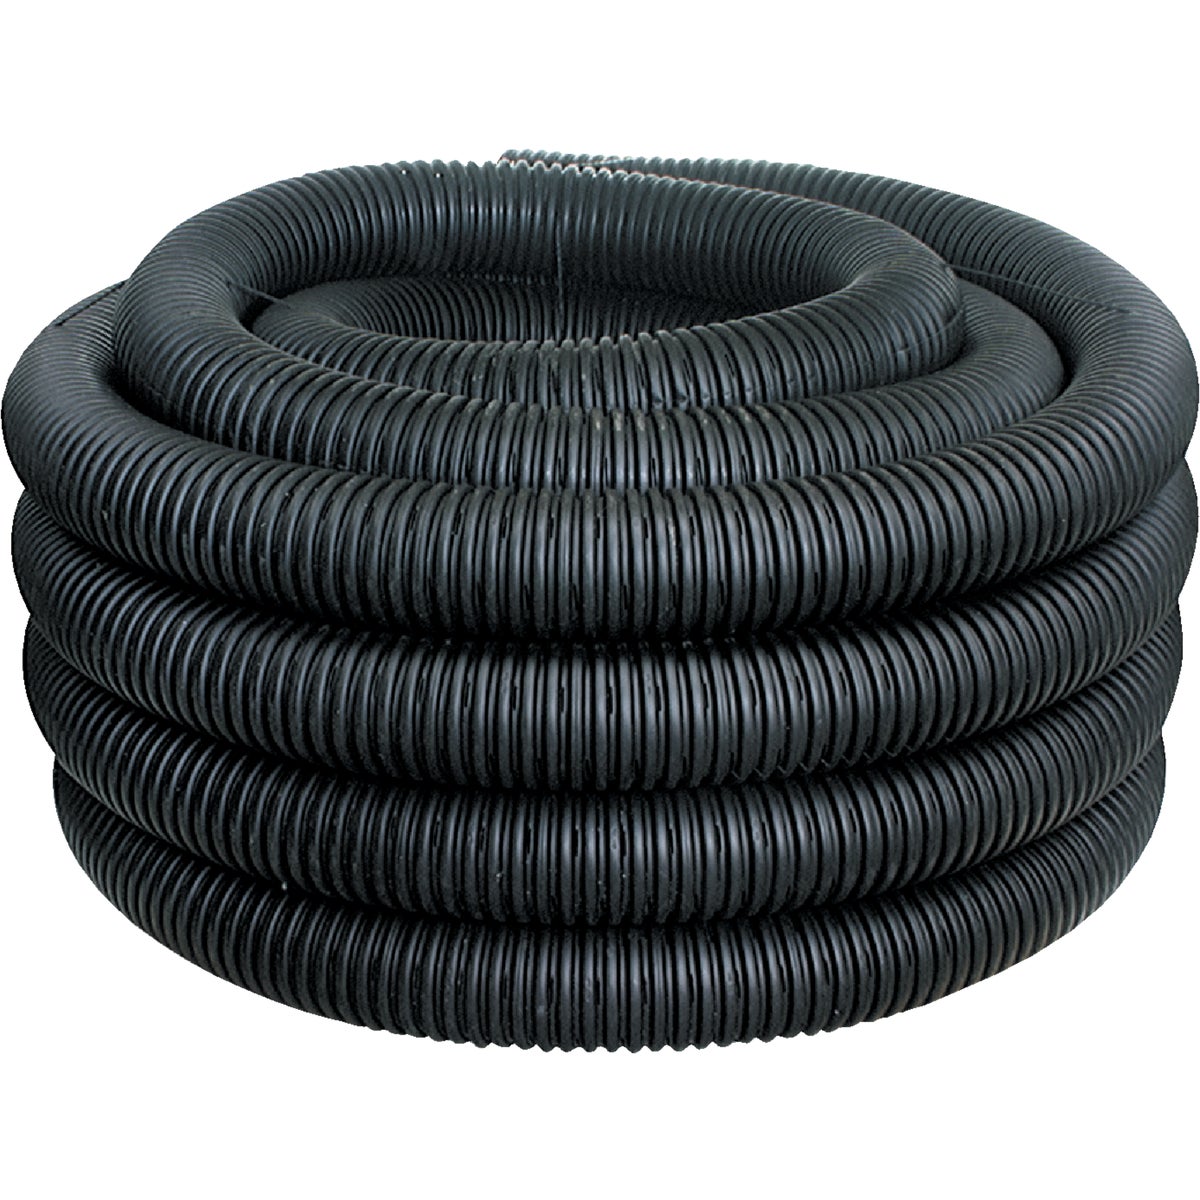 Advanced Drainage Systems 4 In. X 100 Ft. Corrugated Perforated Drainage Pipe